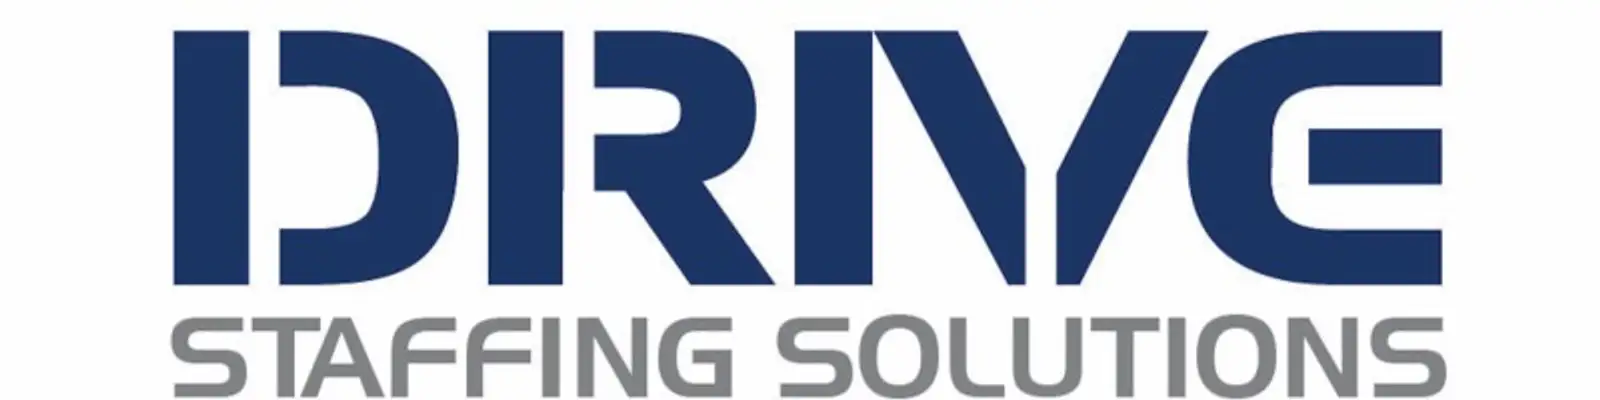 Drive Staffing Solutions logo